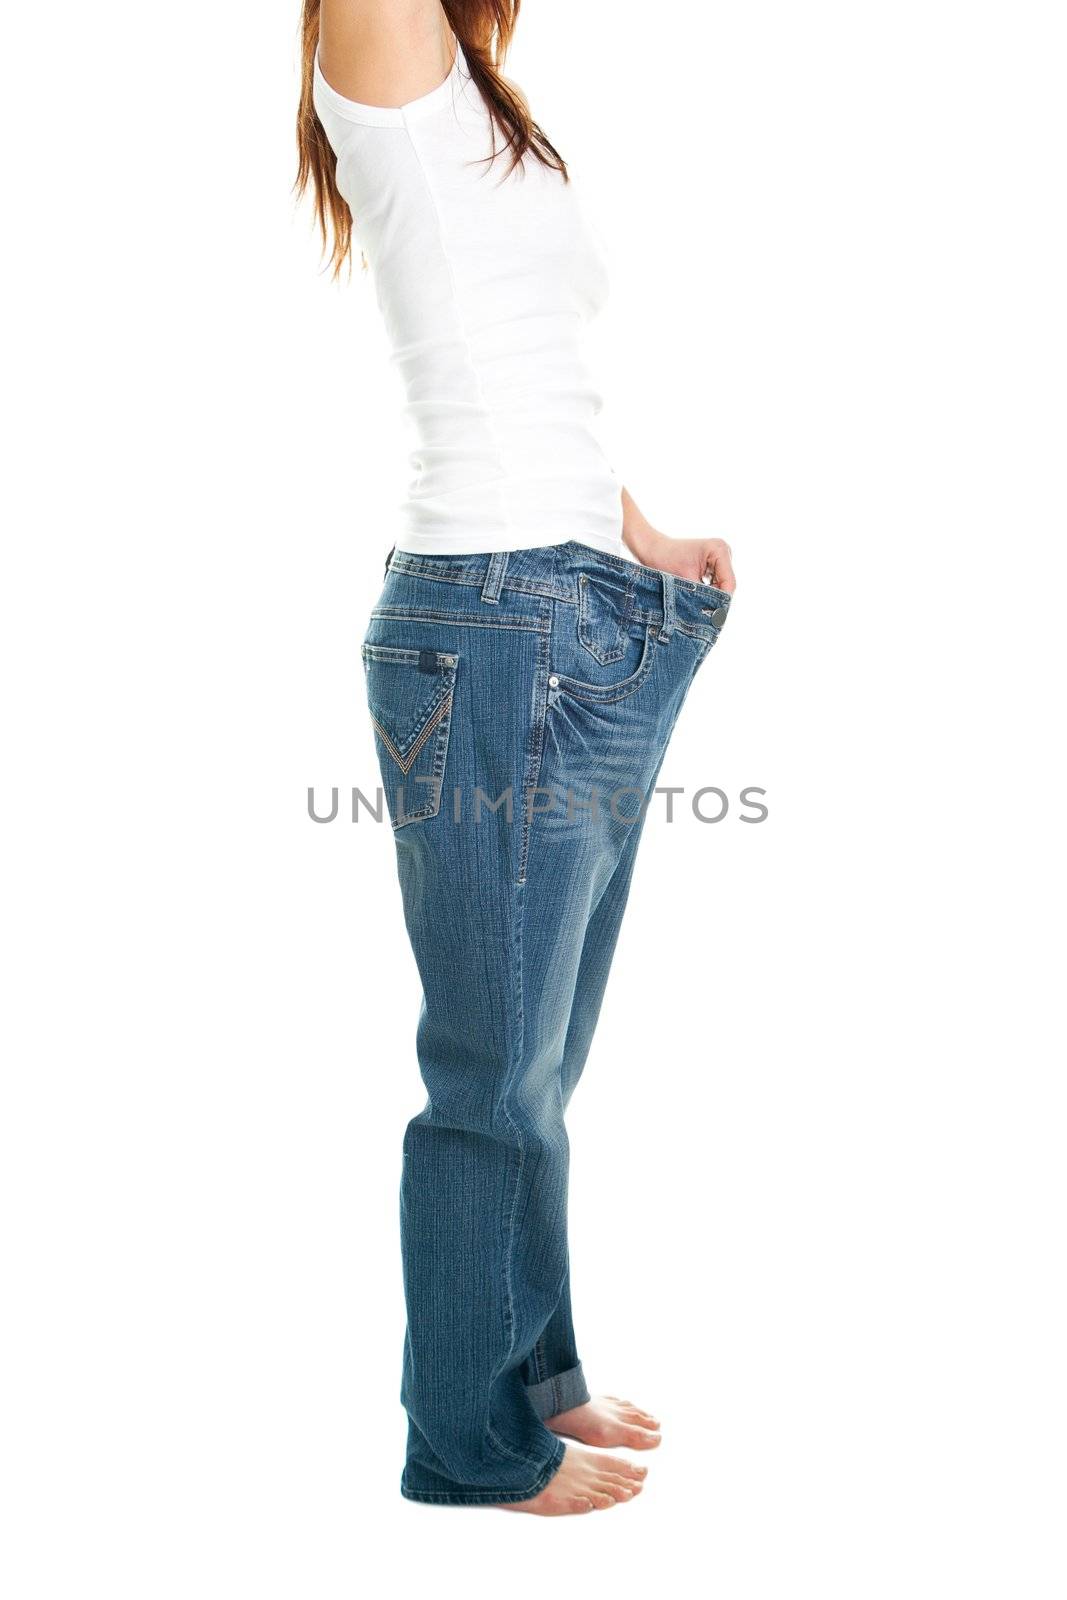 Slim woman pulling oversized jeans. Weight loss concept. Isolated on white